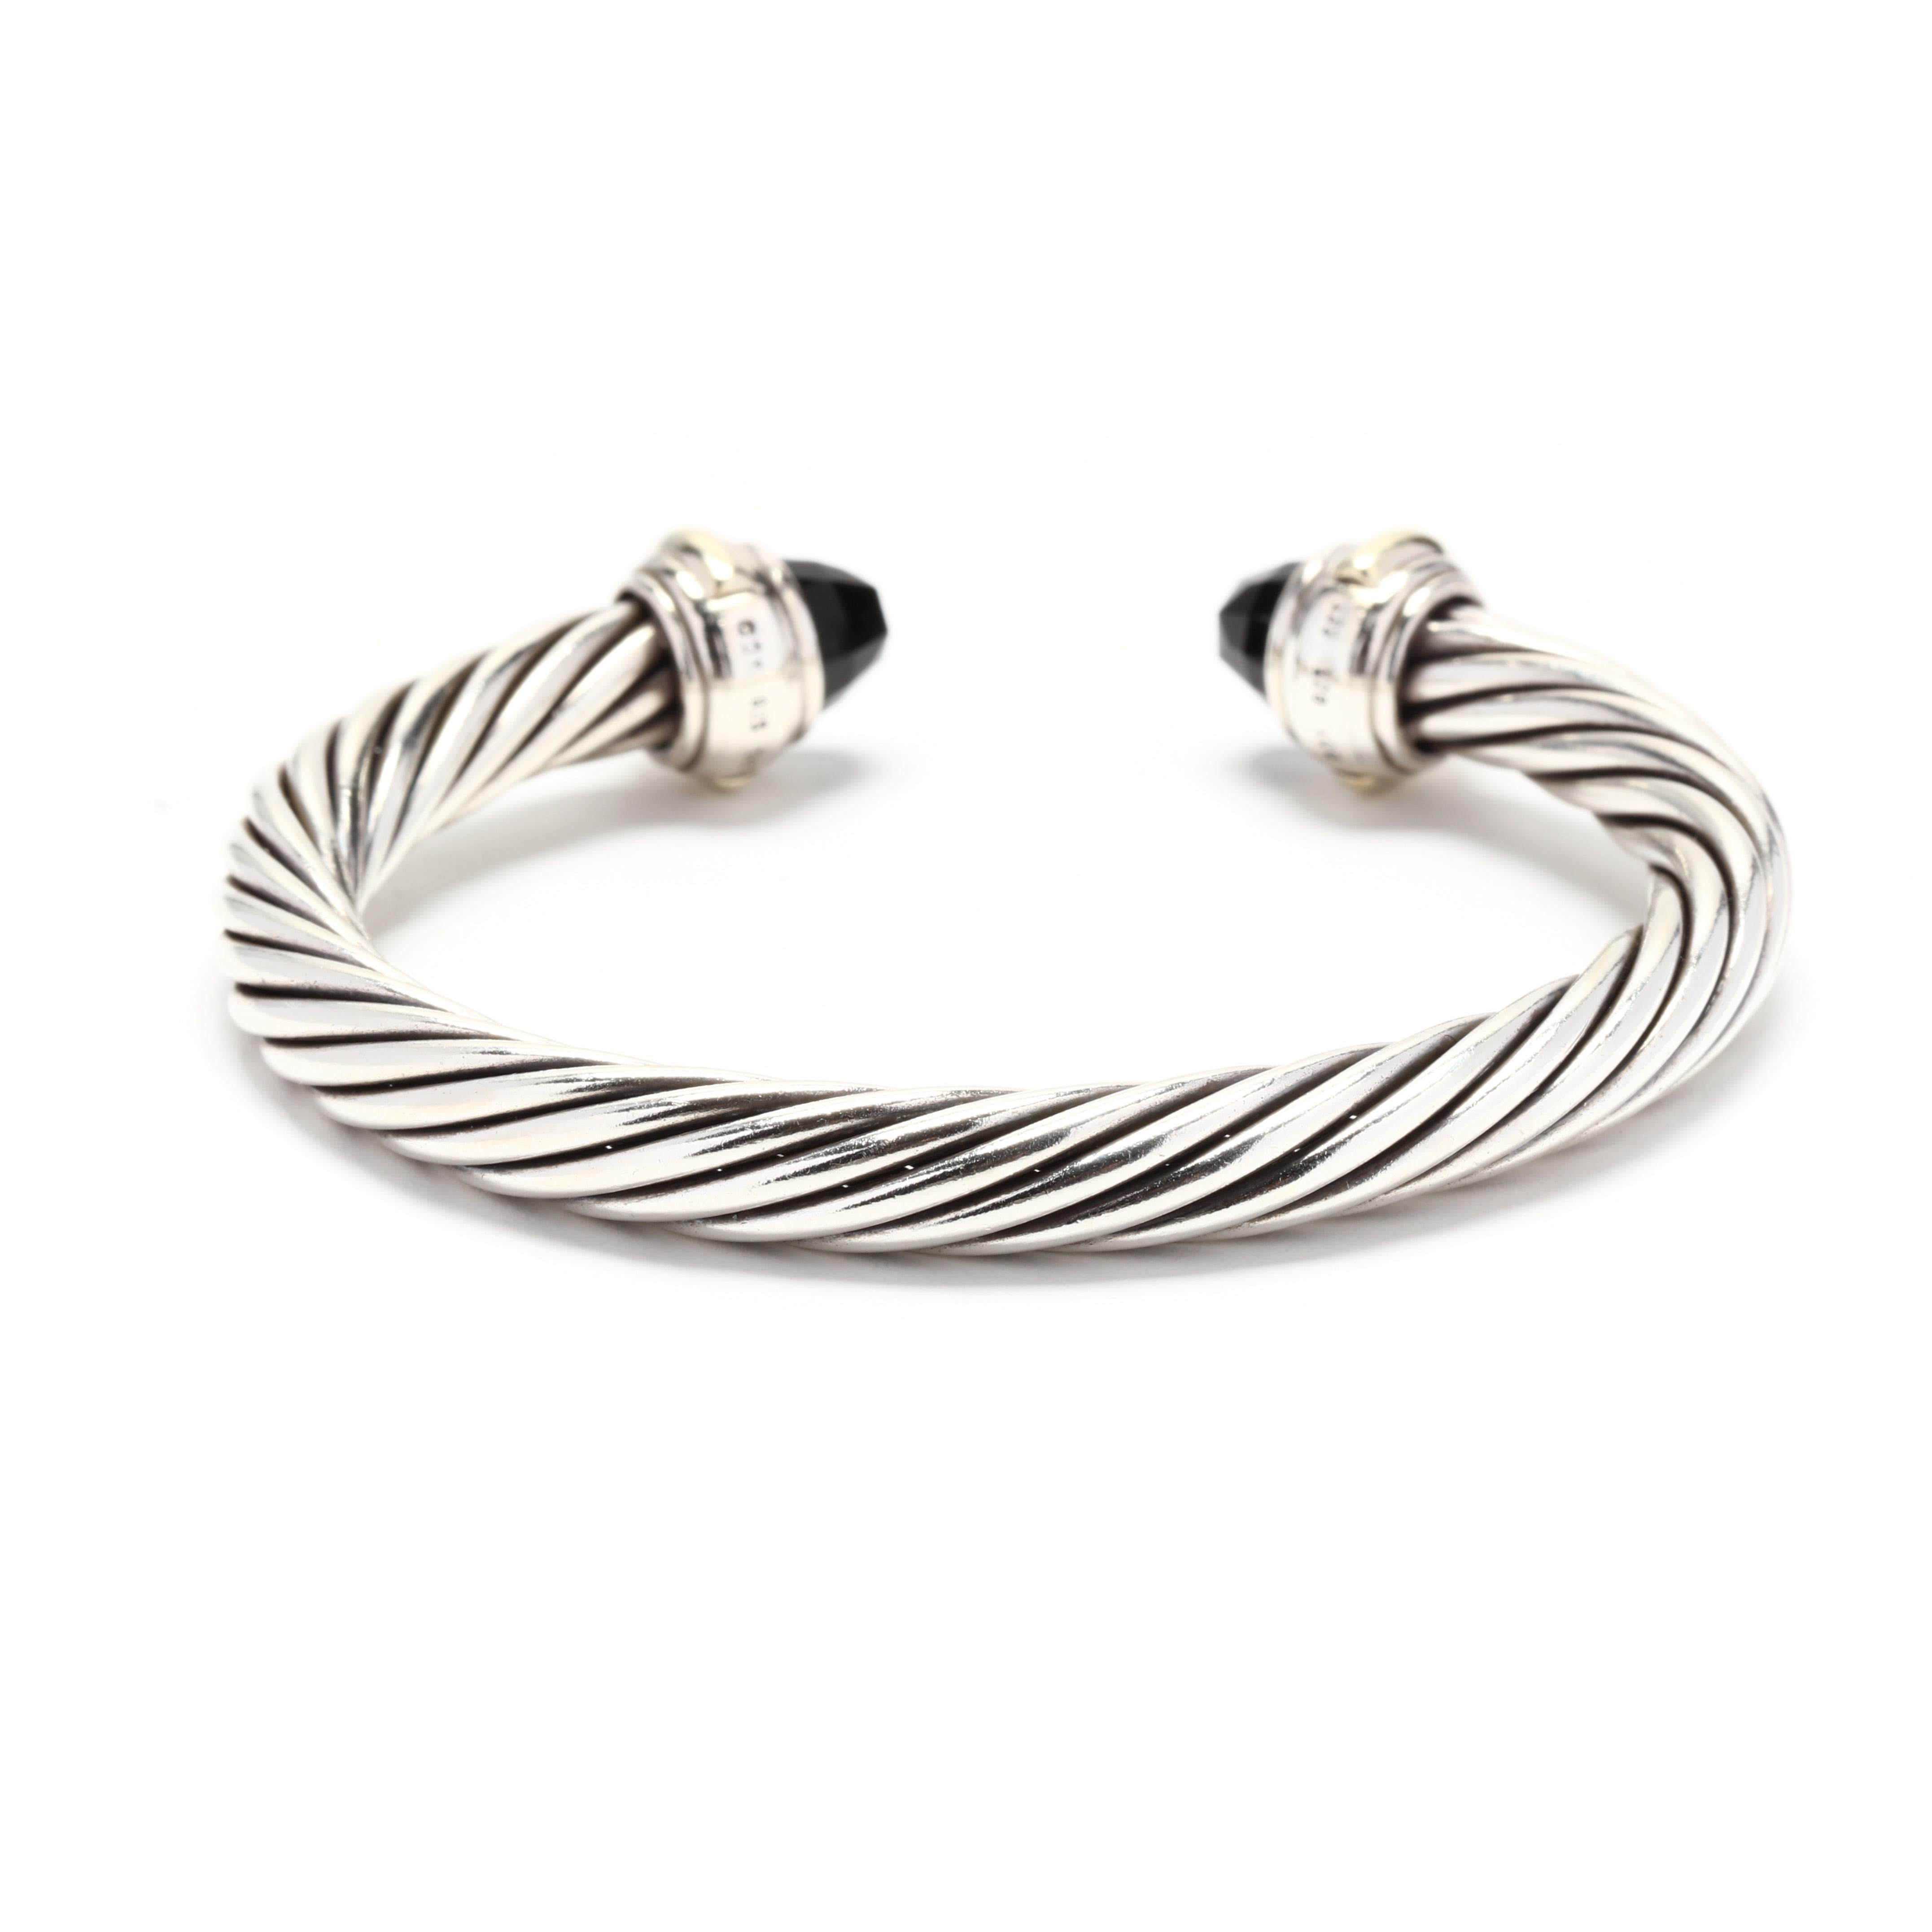 A 14 karat yellow gold and sterling silver black onyx cuff bracelet by David Yurman. This bracelet features a silver cable cuff design with faceted black onyx end caps and yellow gold detailing.



Length: 6.25 in.; adjustable



Width: 7